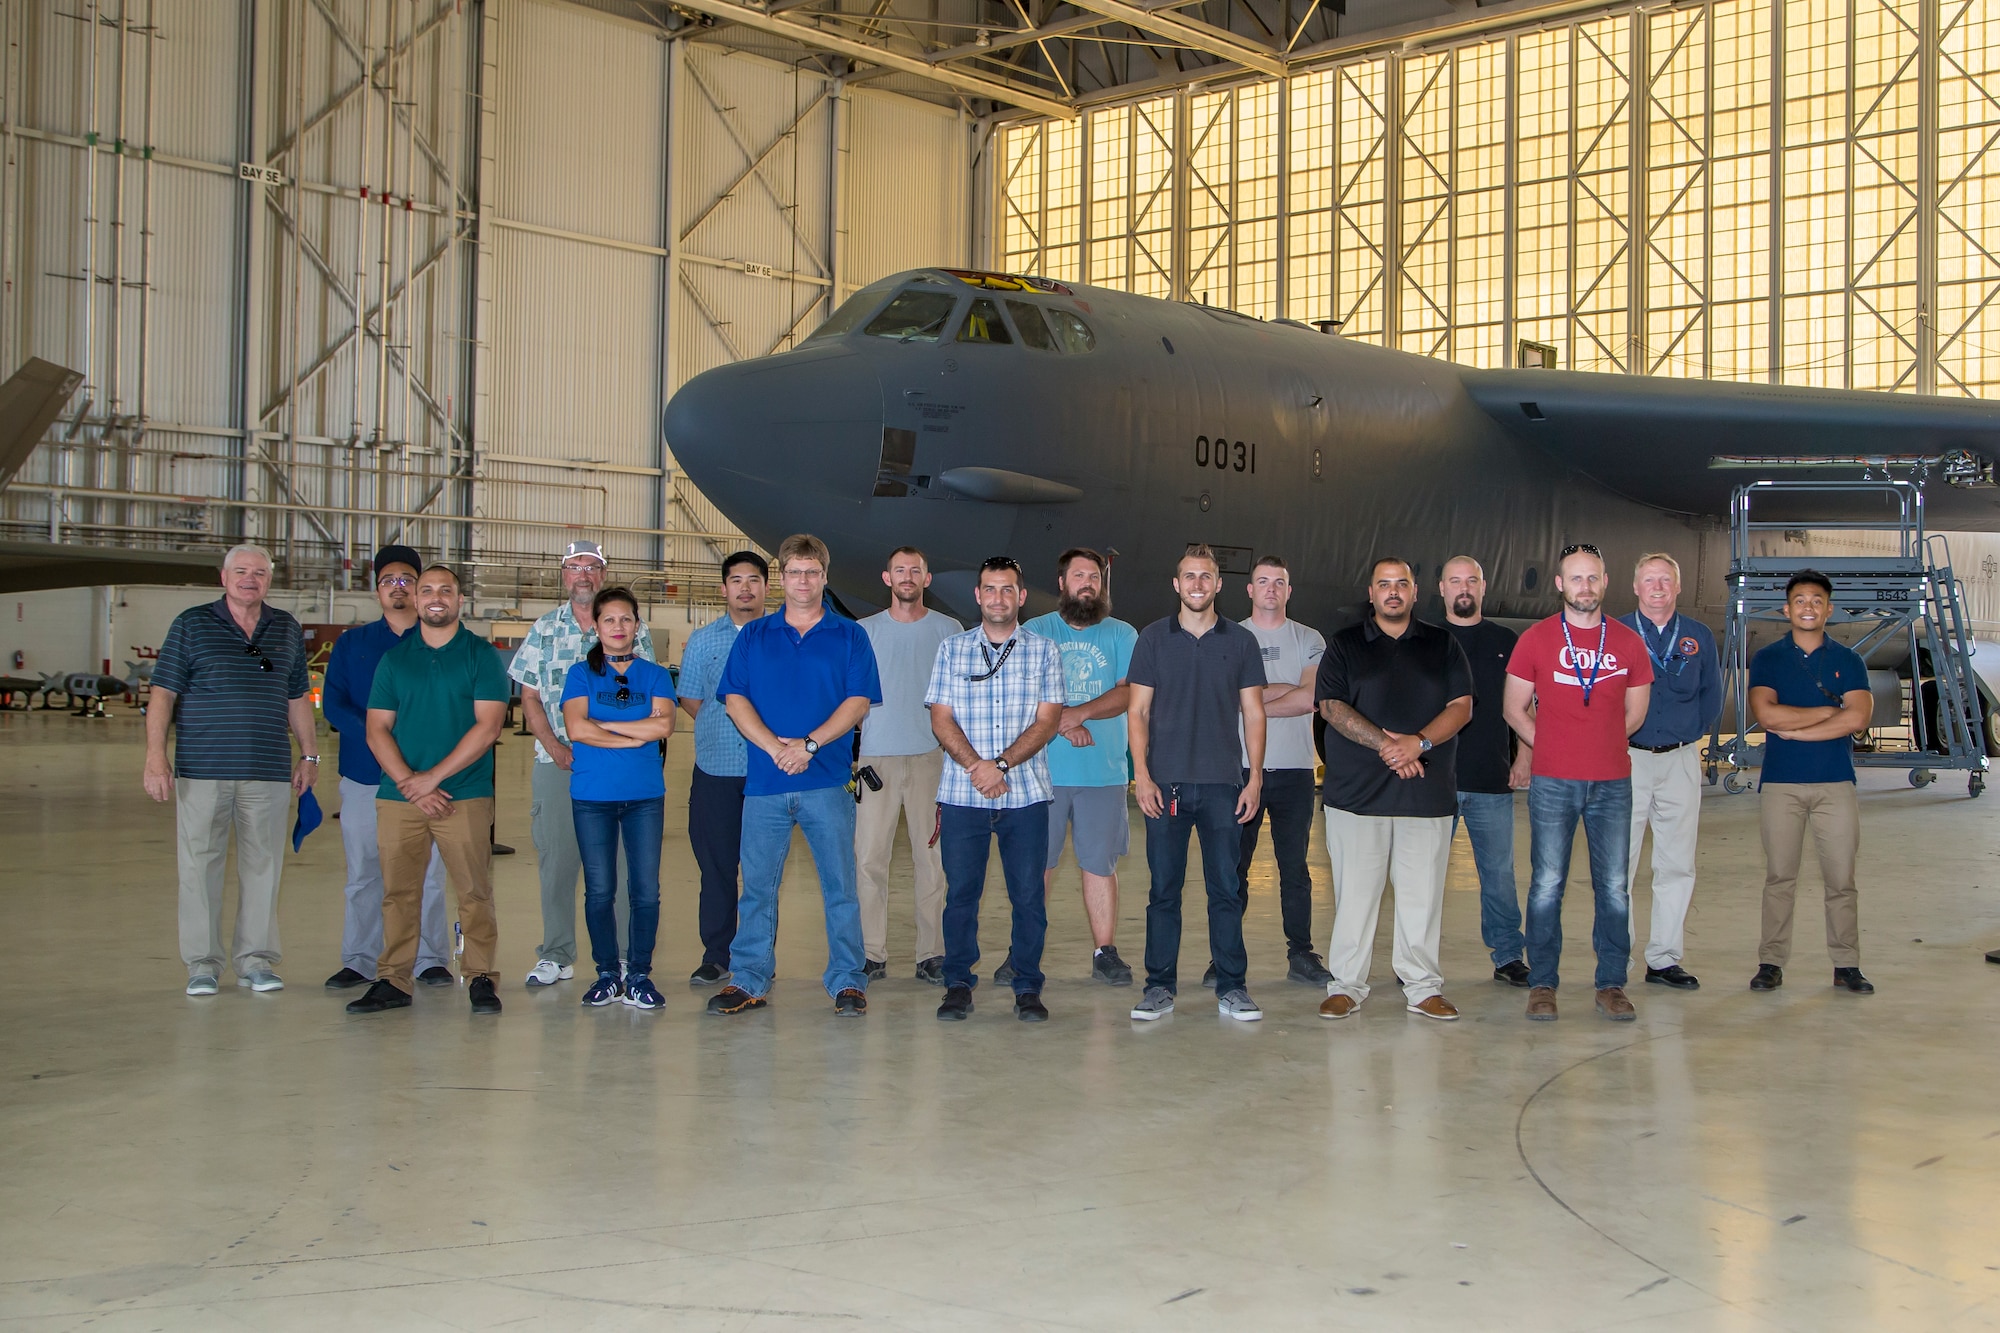 Members of the Bomber Instrumentation Team, 812th Aircraft Instrumentation Test Squadron, pose for a group photo in front of a B-52 Stratofortress at Edwards Air Force Base, California, Aug. 5, 2019. (Air Force photo by Ethan Wagner)